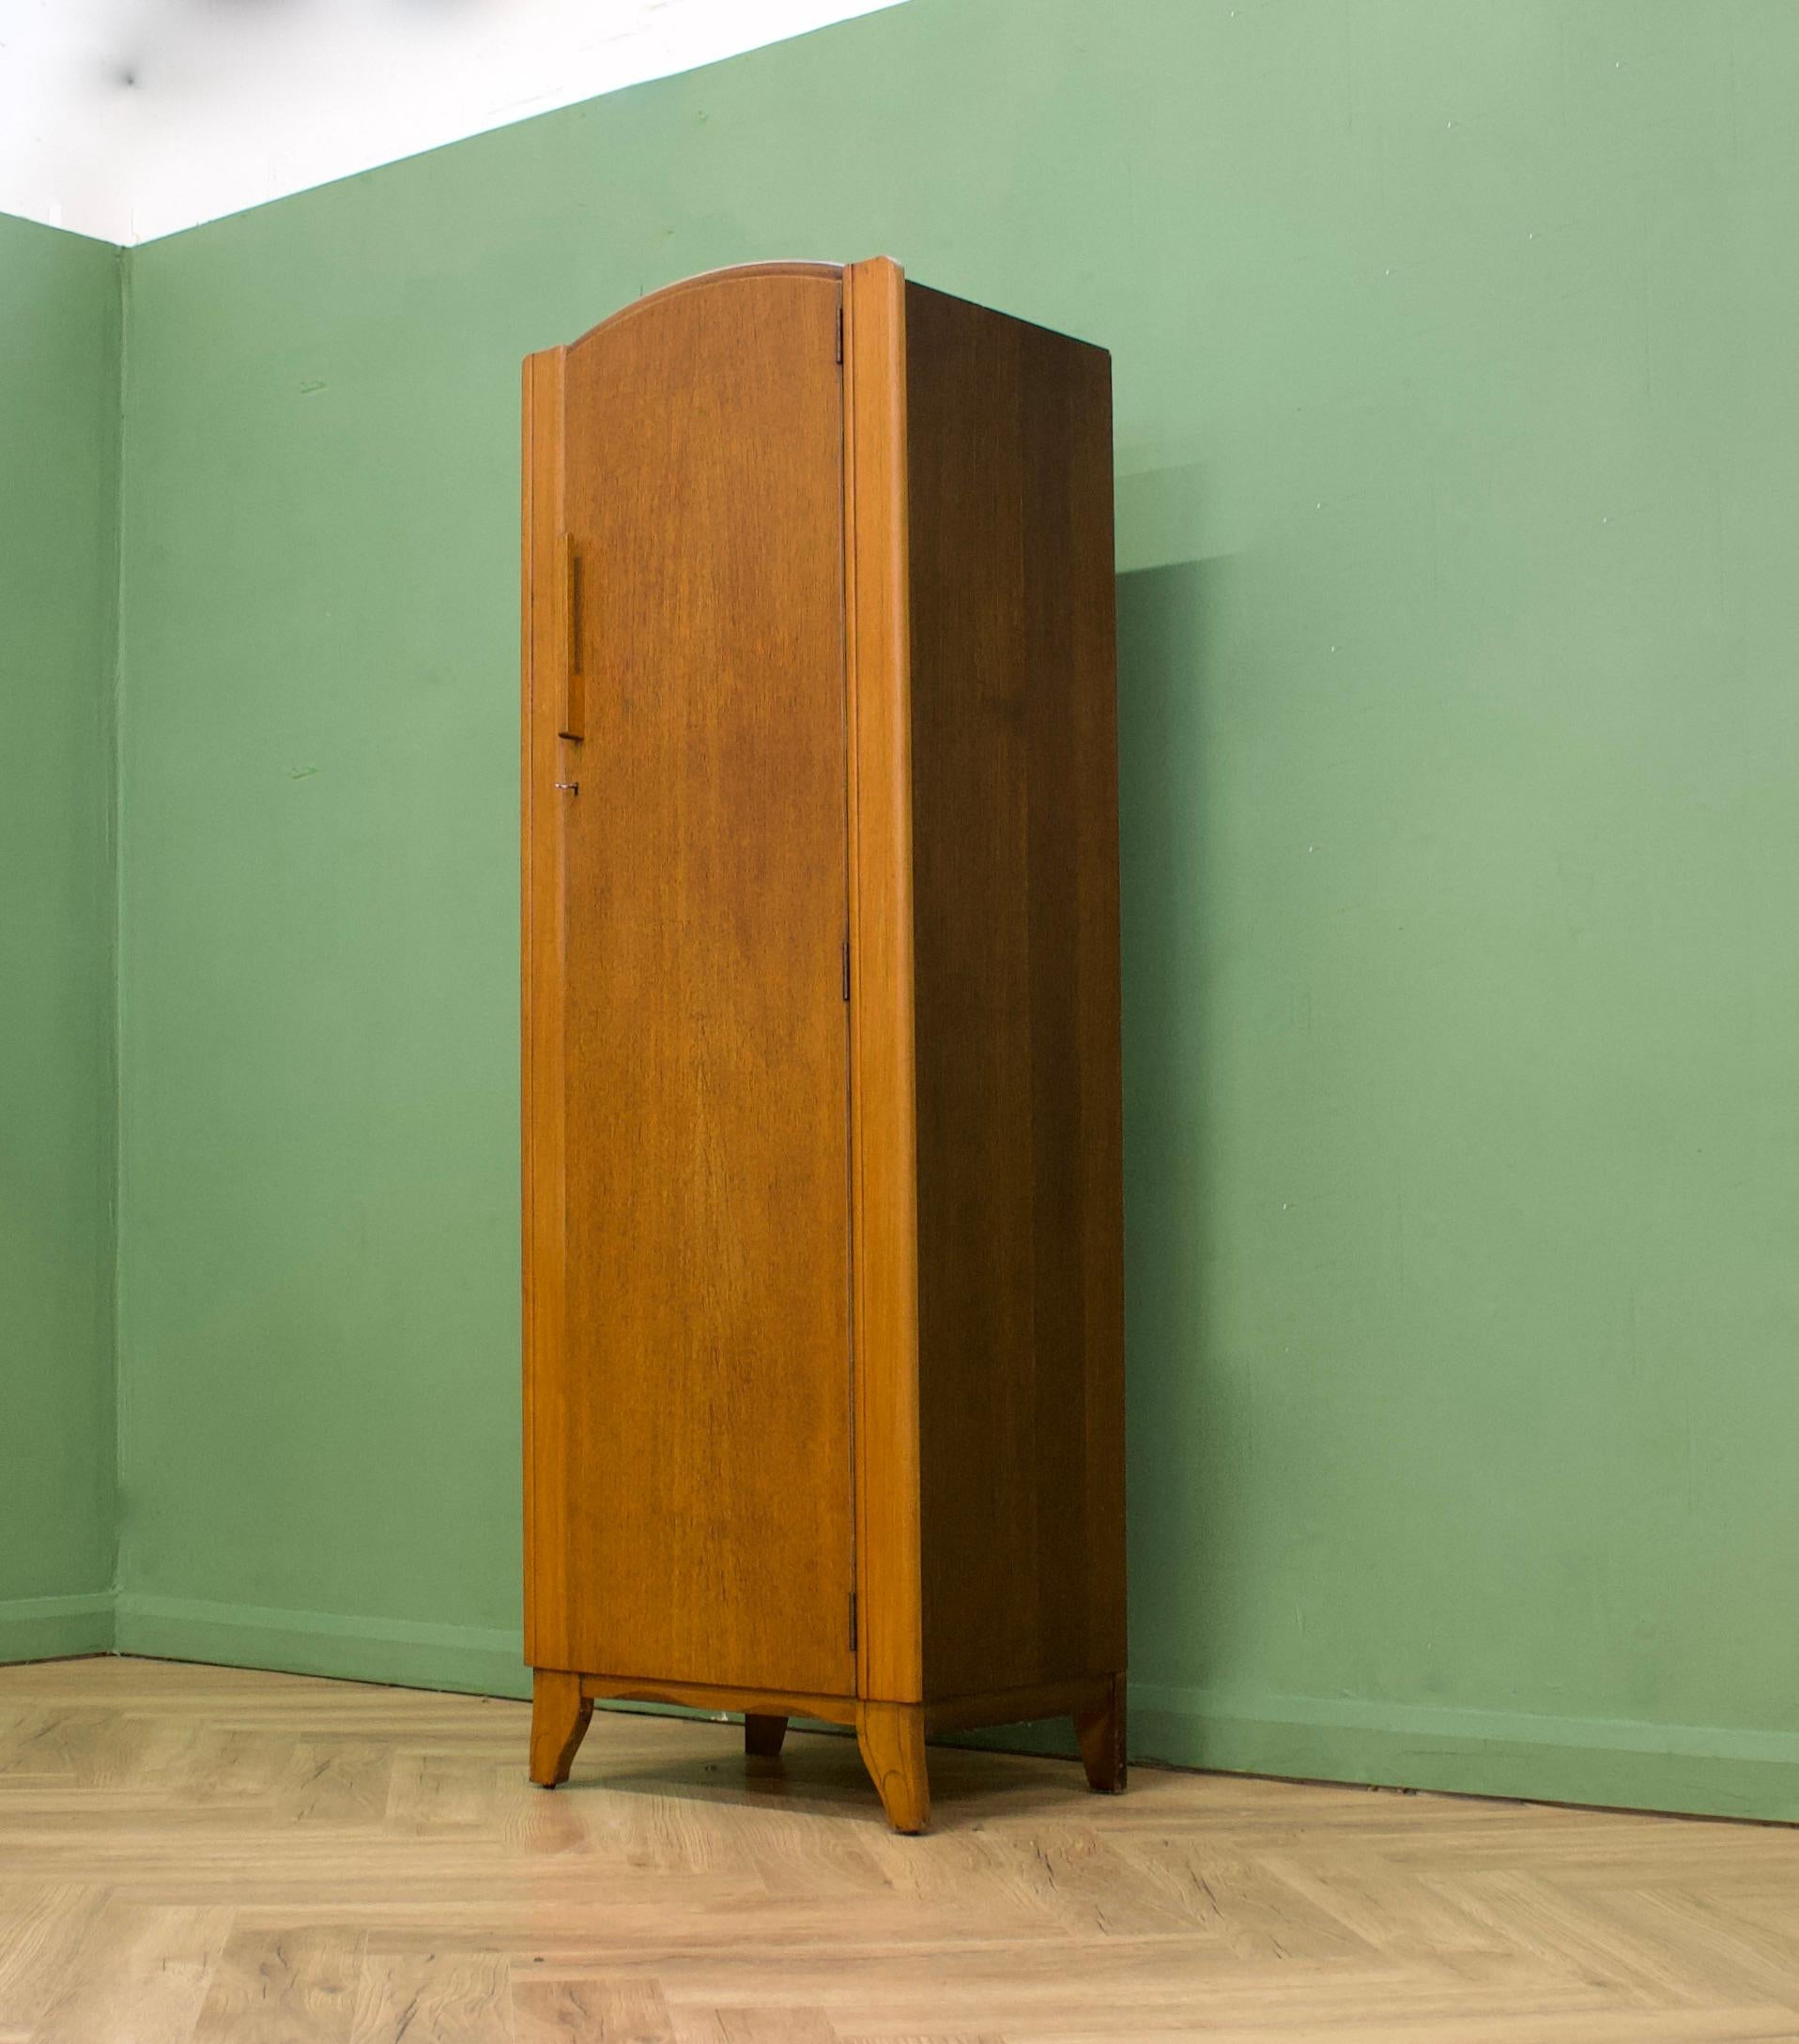 Wood British Vintage Art Deco Style Oak Wardrobe from Lebus, 1950s For Sale